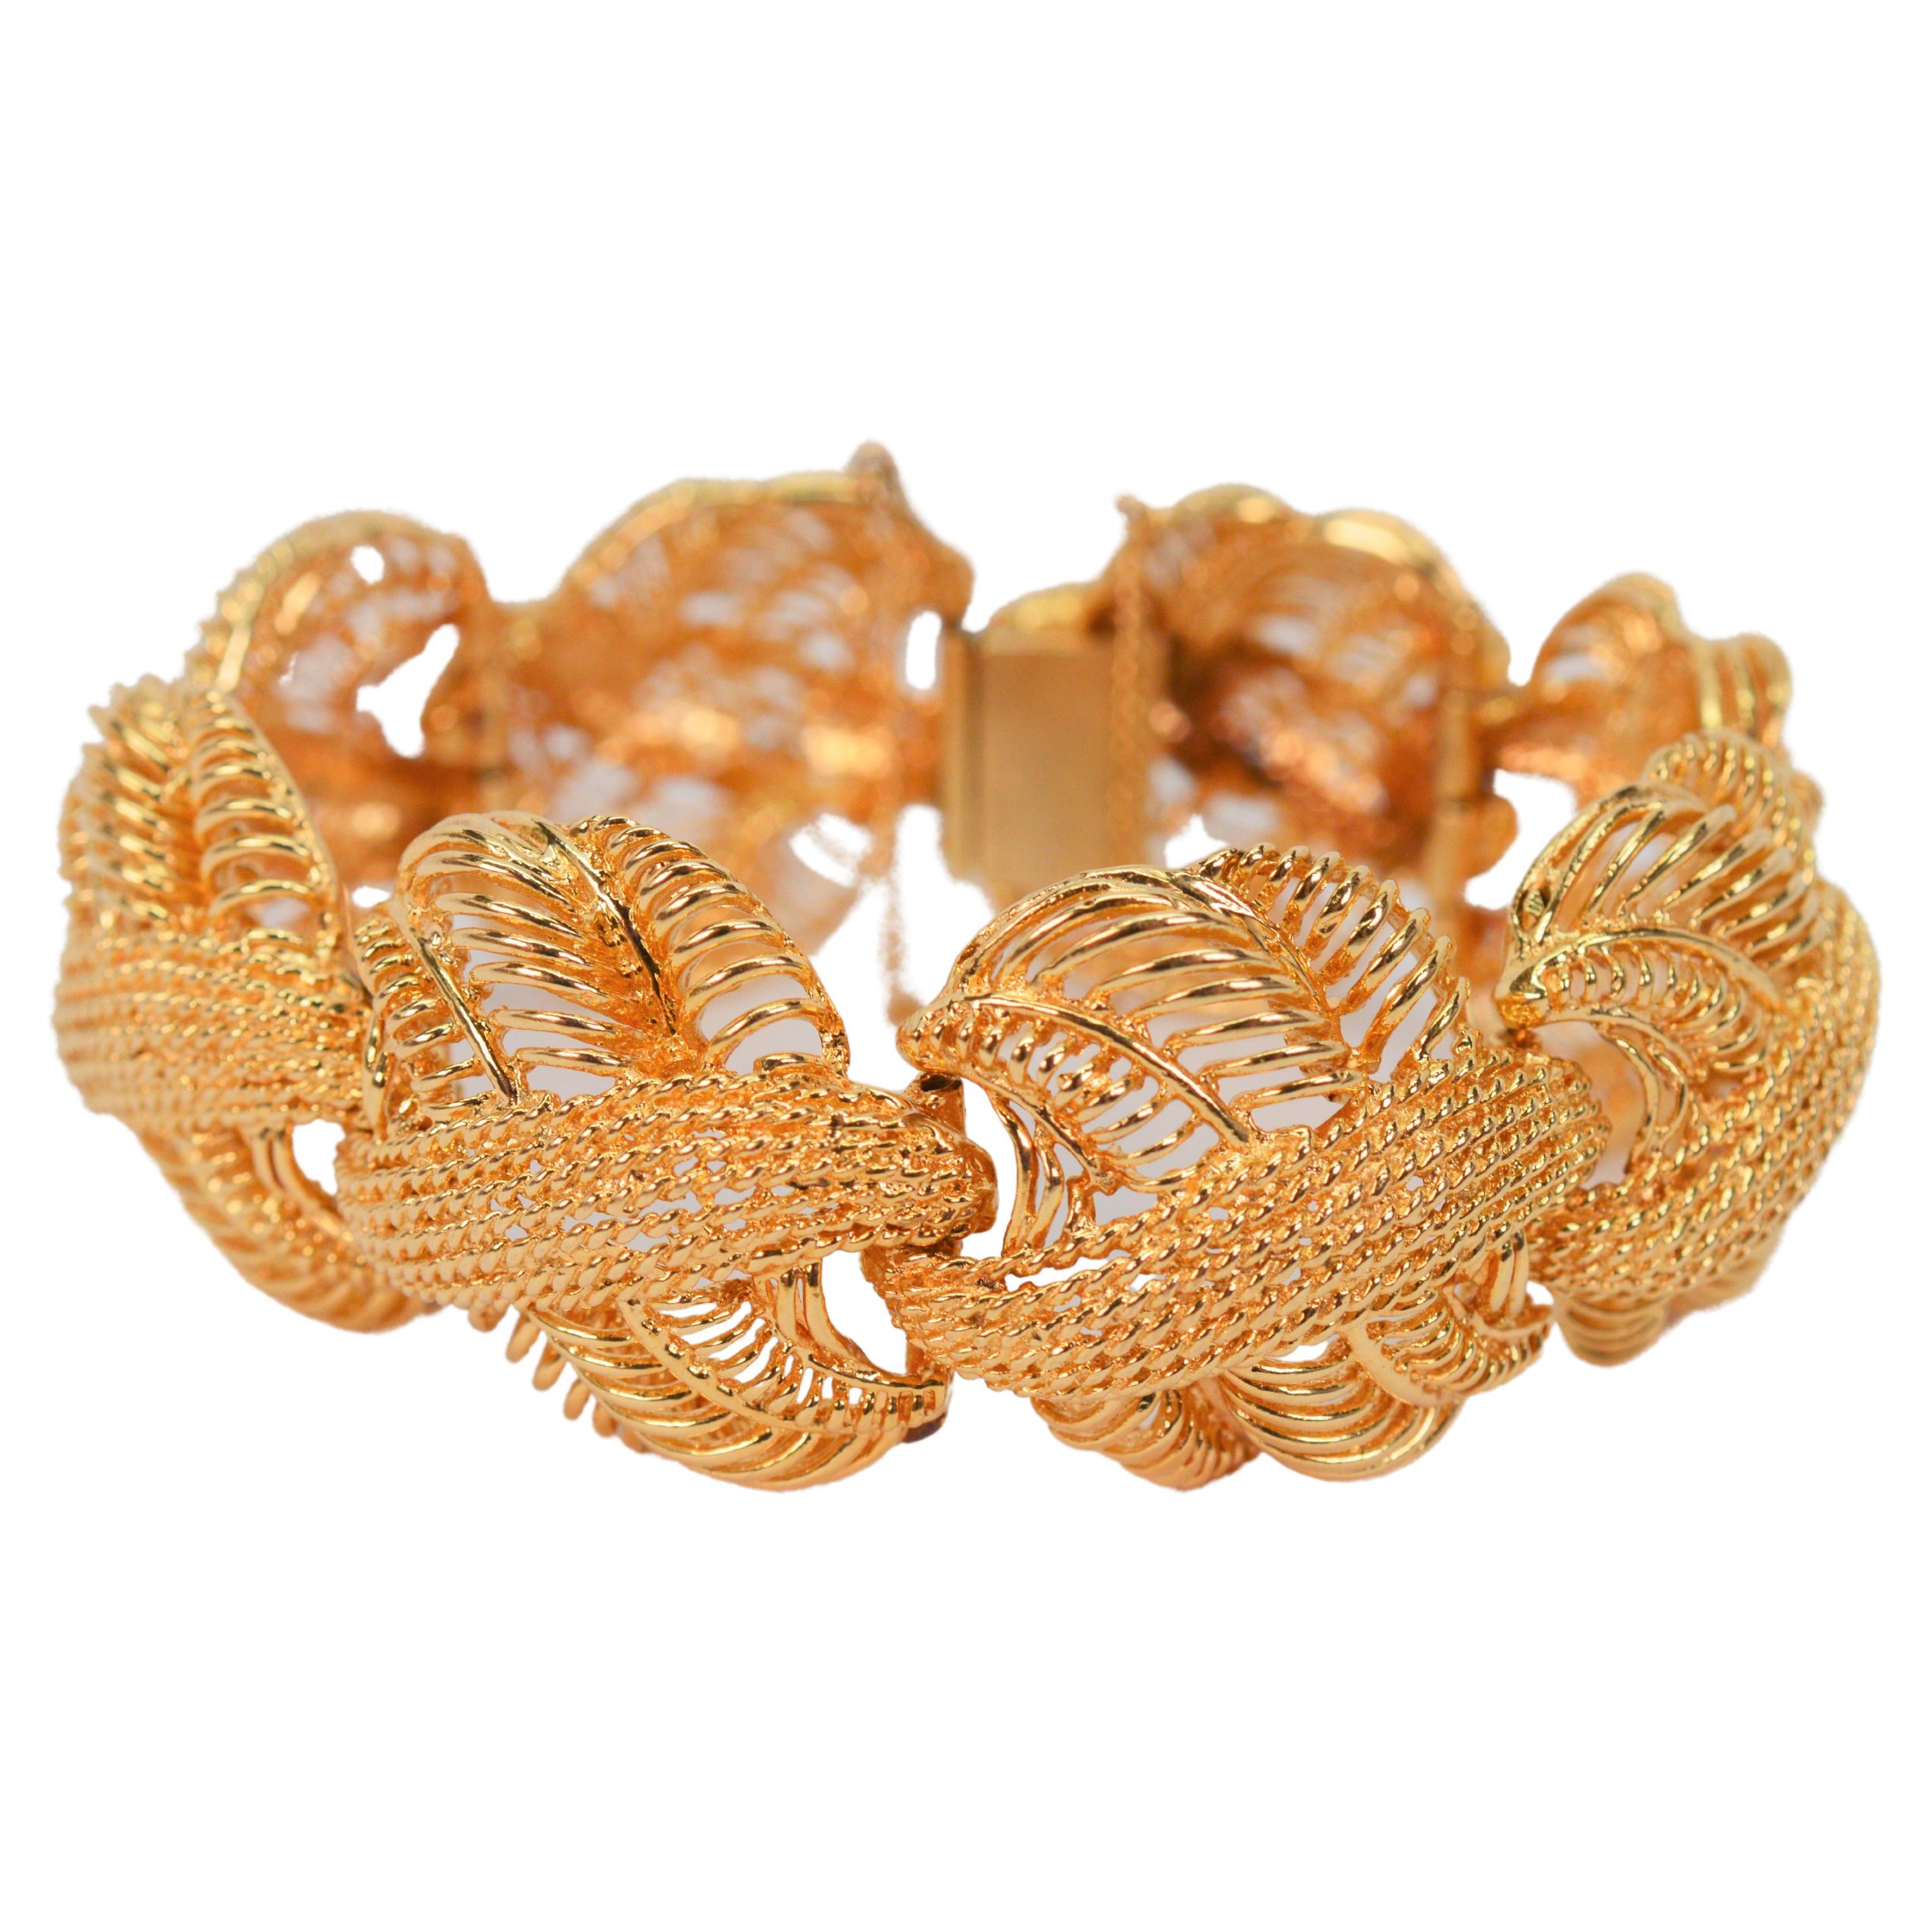 A fancy open weave in bright fourteen karat 14K yellow gold gives this boldly stylish rosette inspired gold bracelet its true elegance. Crafted convex woven gold links, measuring approximately one inch, are each individually hinged and give this